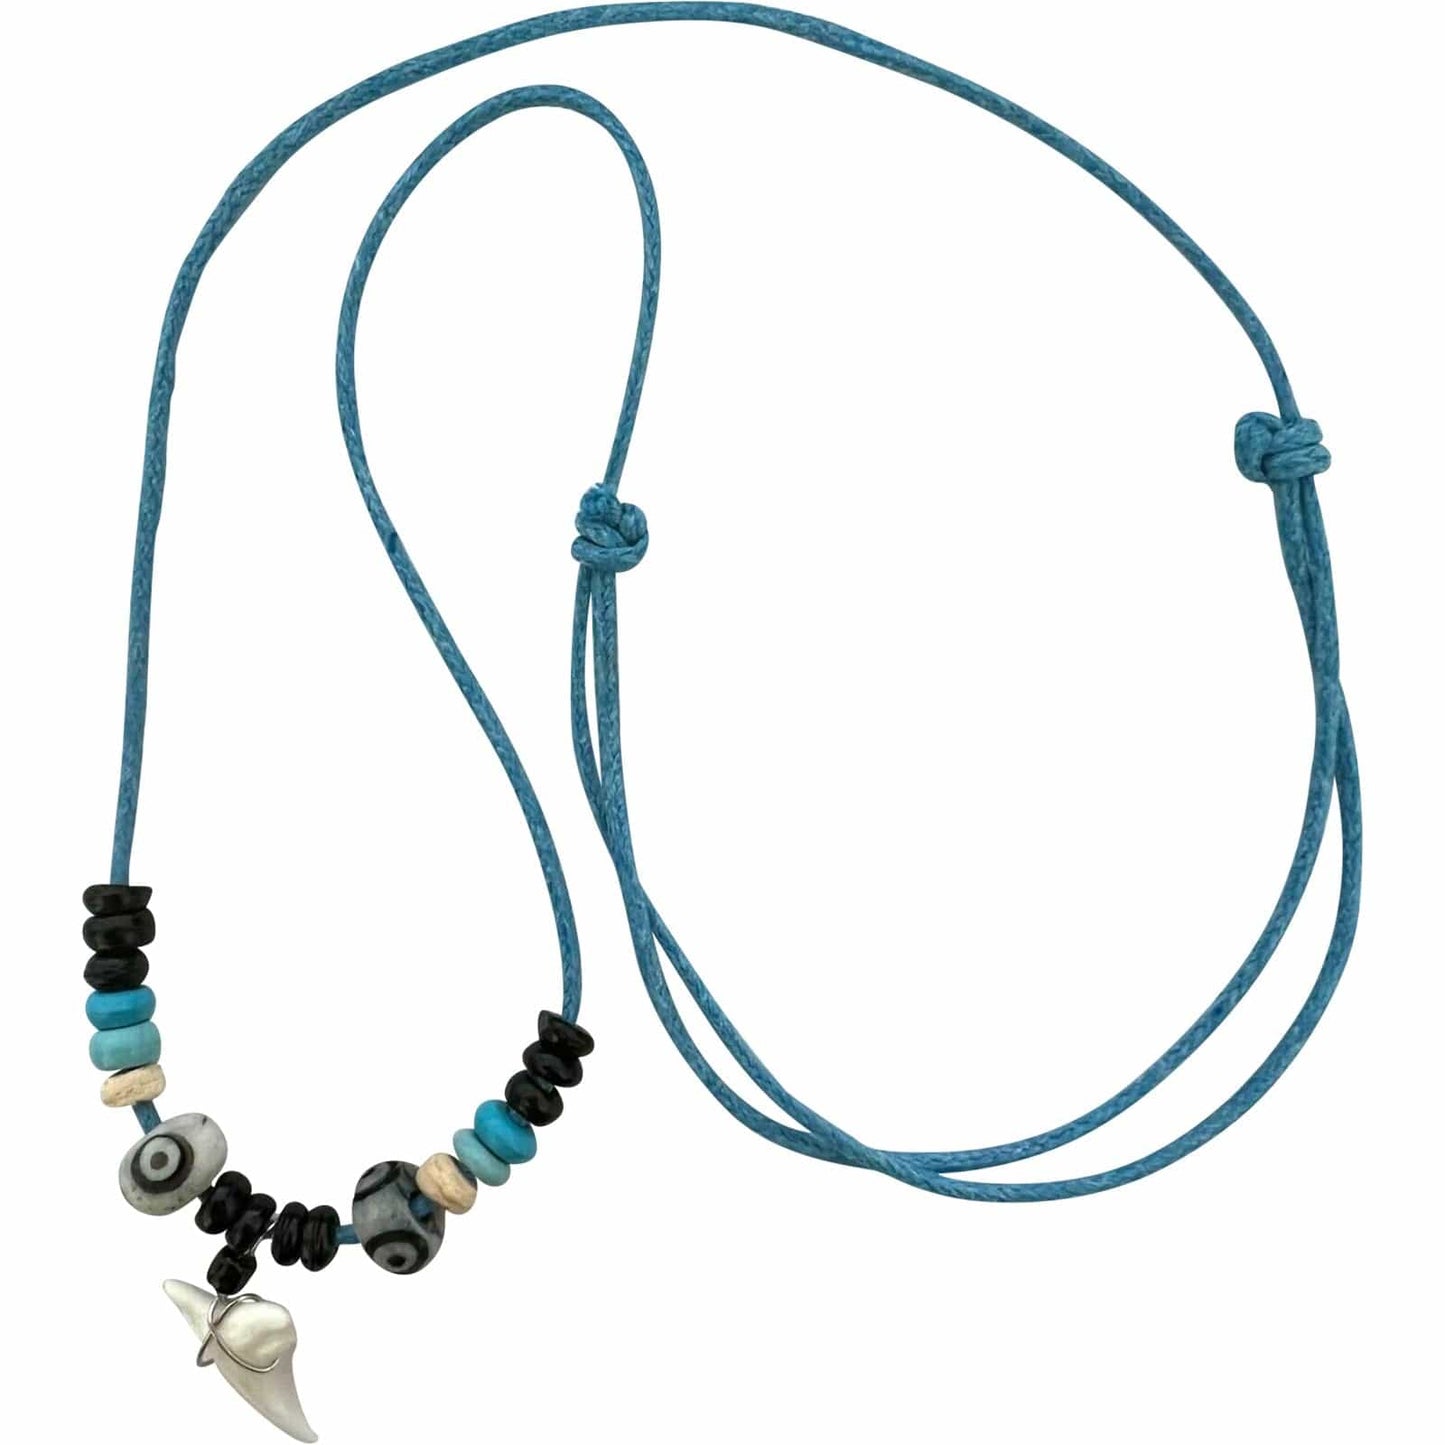 Imitation Resin Shark Tooth Pendant Blue Turquoise Cord Chain Wood Beads Surf Necklace Jewellery